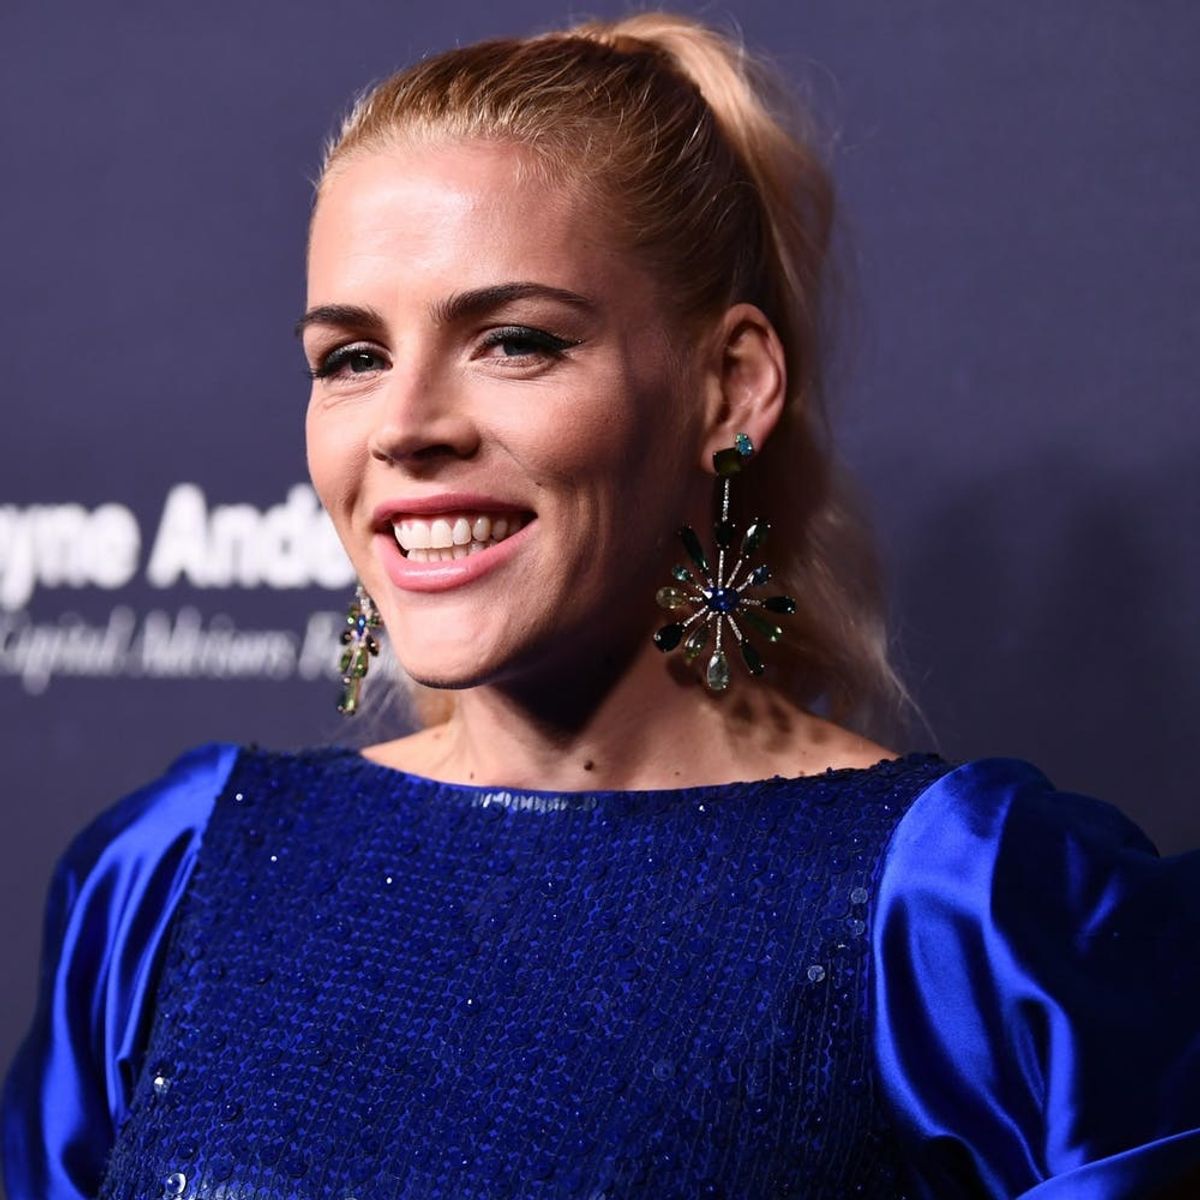 Busy Philipps and Kylie Jenner Made Time’s 2018 List of the 25 Most Influential People on the Internet